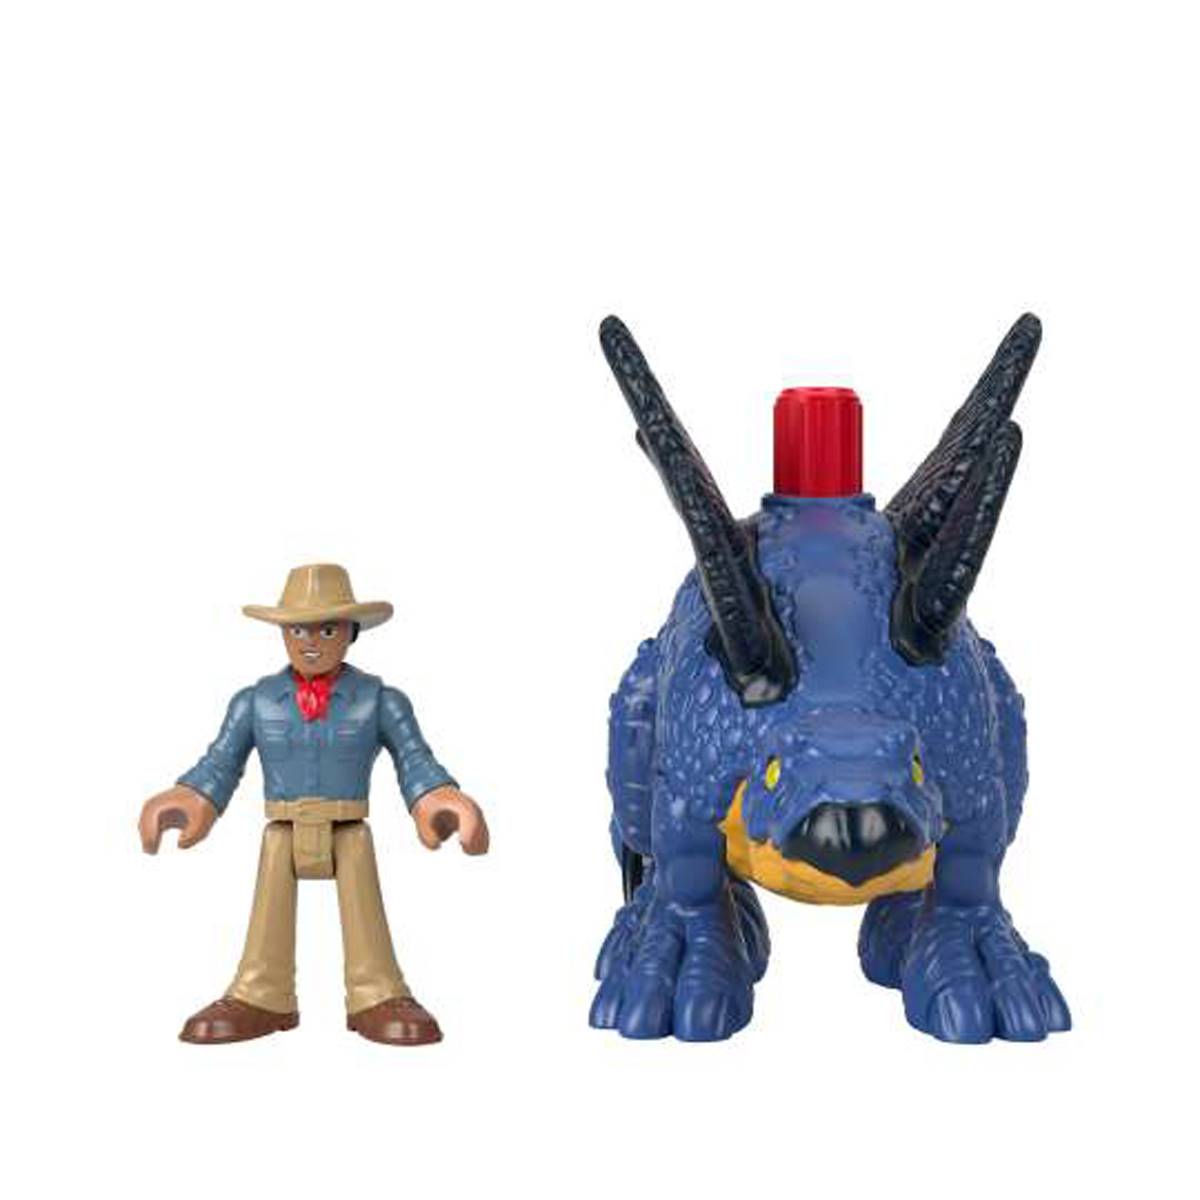 Fisher-Price(R) Imaginext(R) Jurassic World Stego With Dr. Grant